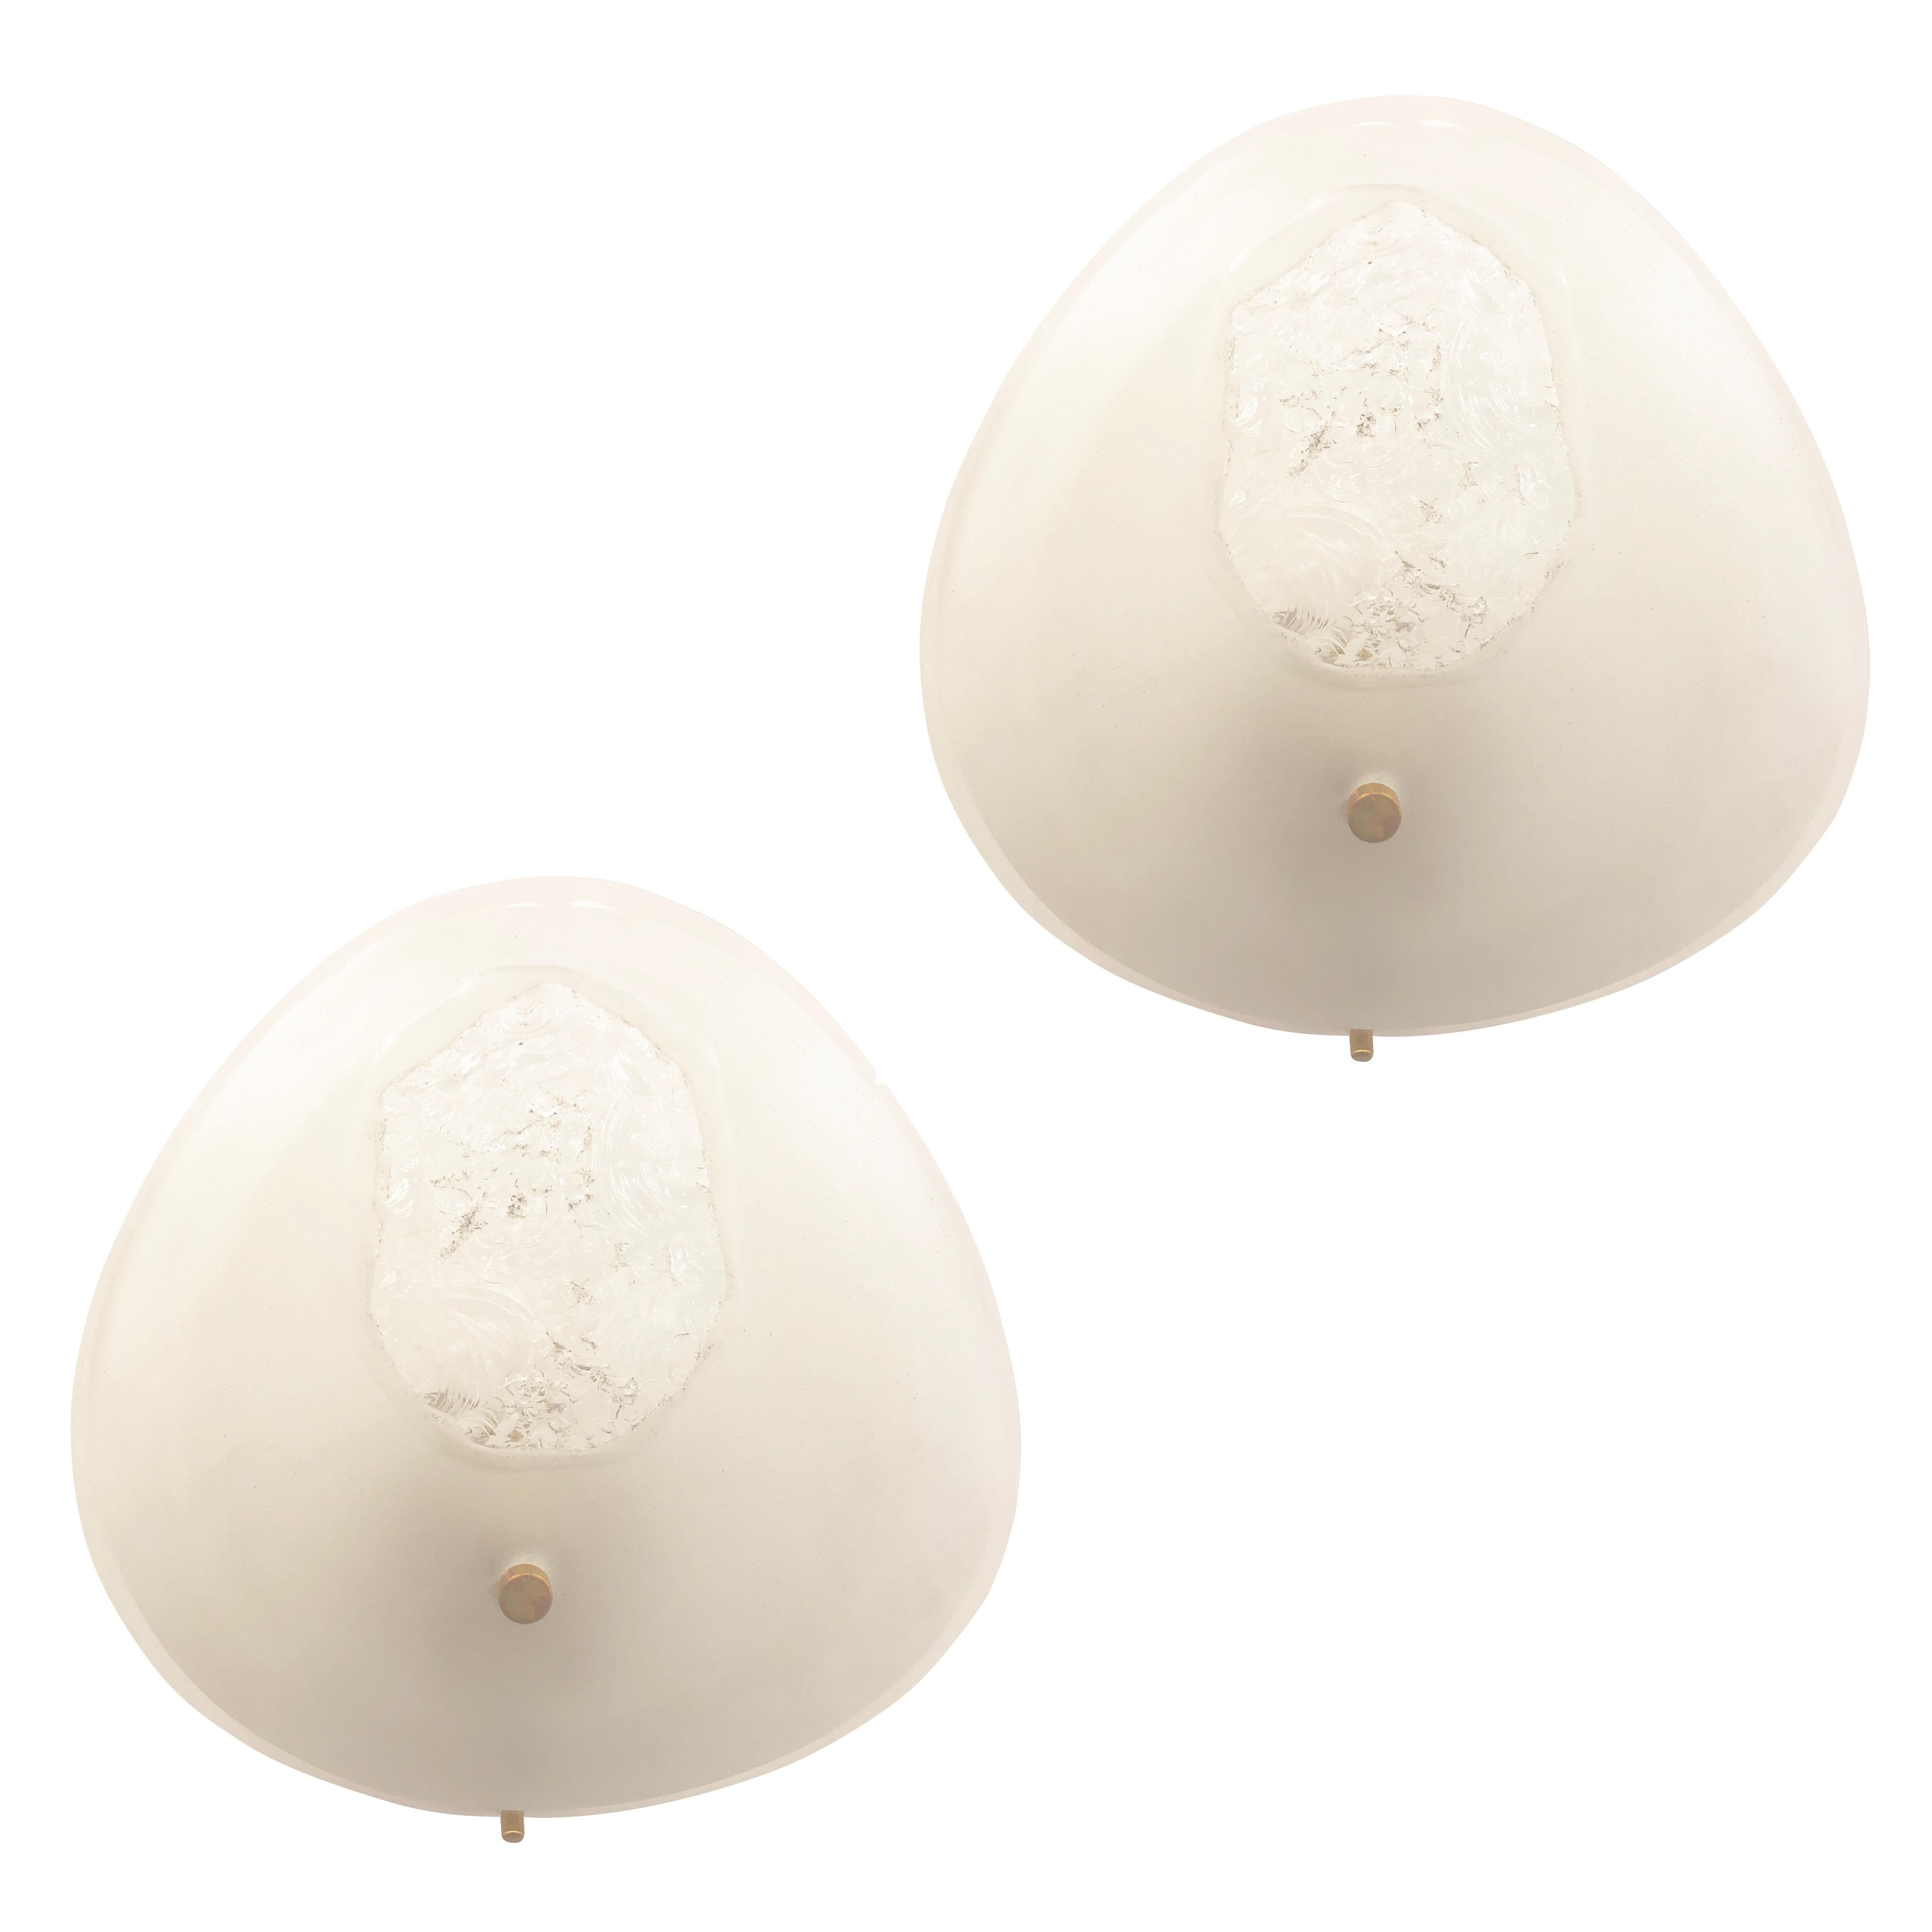 Rare pair of Fontana Arte wall lights designed by Max Ingrand in the 1950s. They feature a thick teardrop shaped frosted glass with a hand chiseled center and a deep bevel all around. Brass mounts connect the glass to the white lacquered frame. One